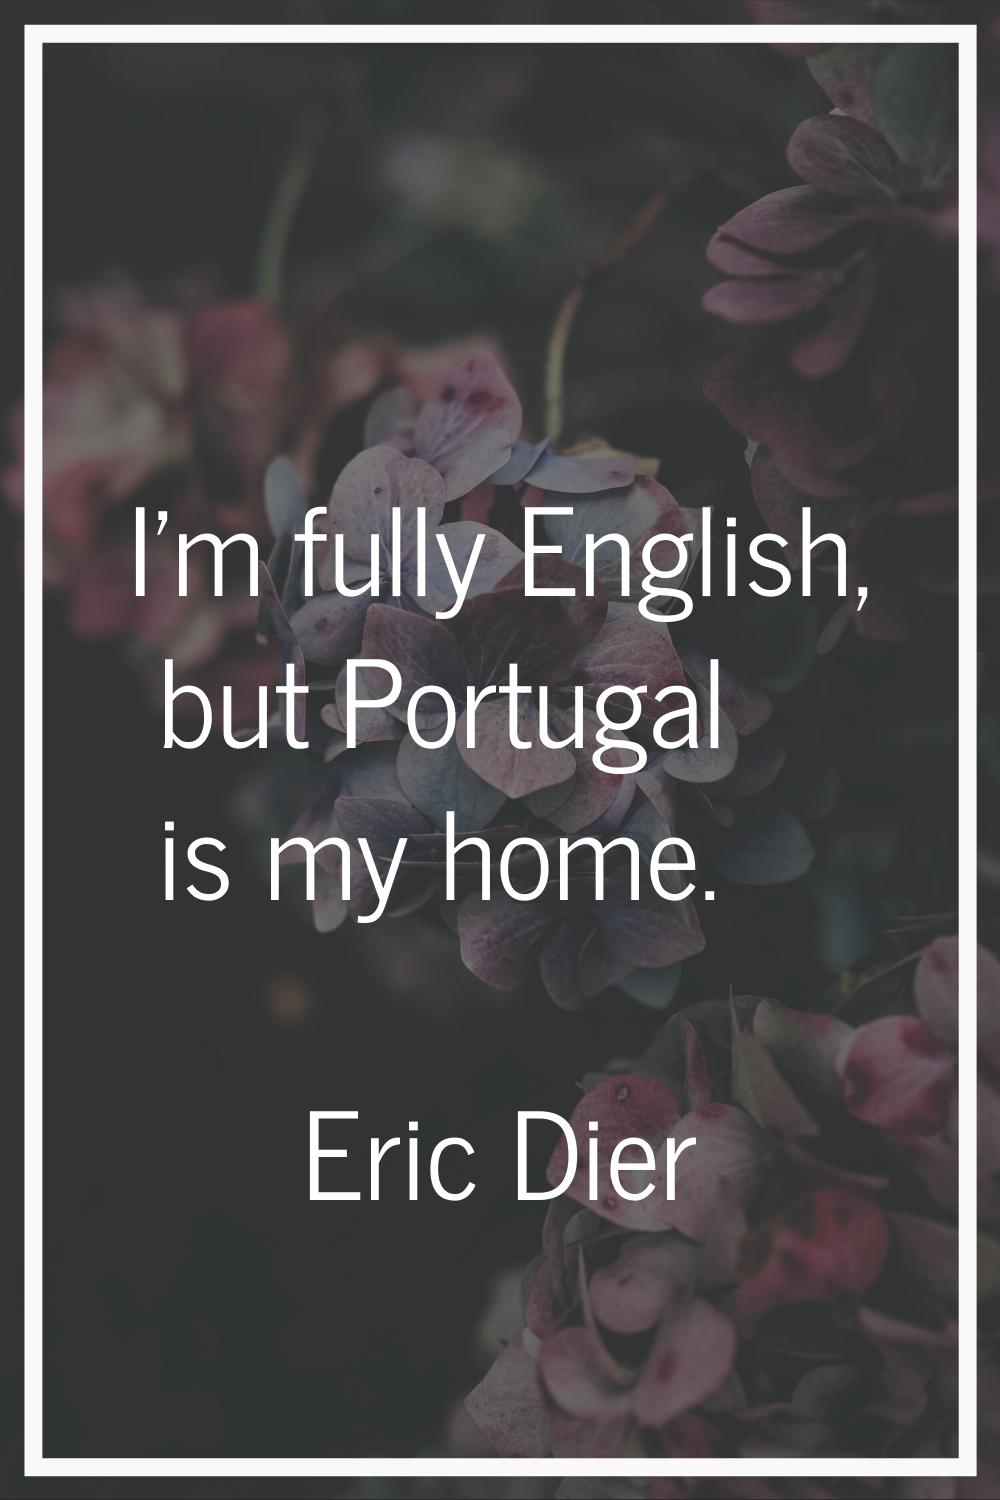 I'm fully English, but Portugal is my home.